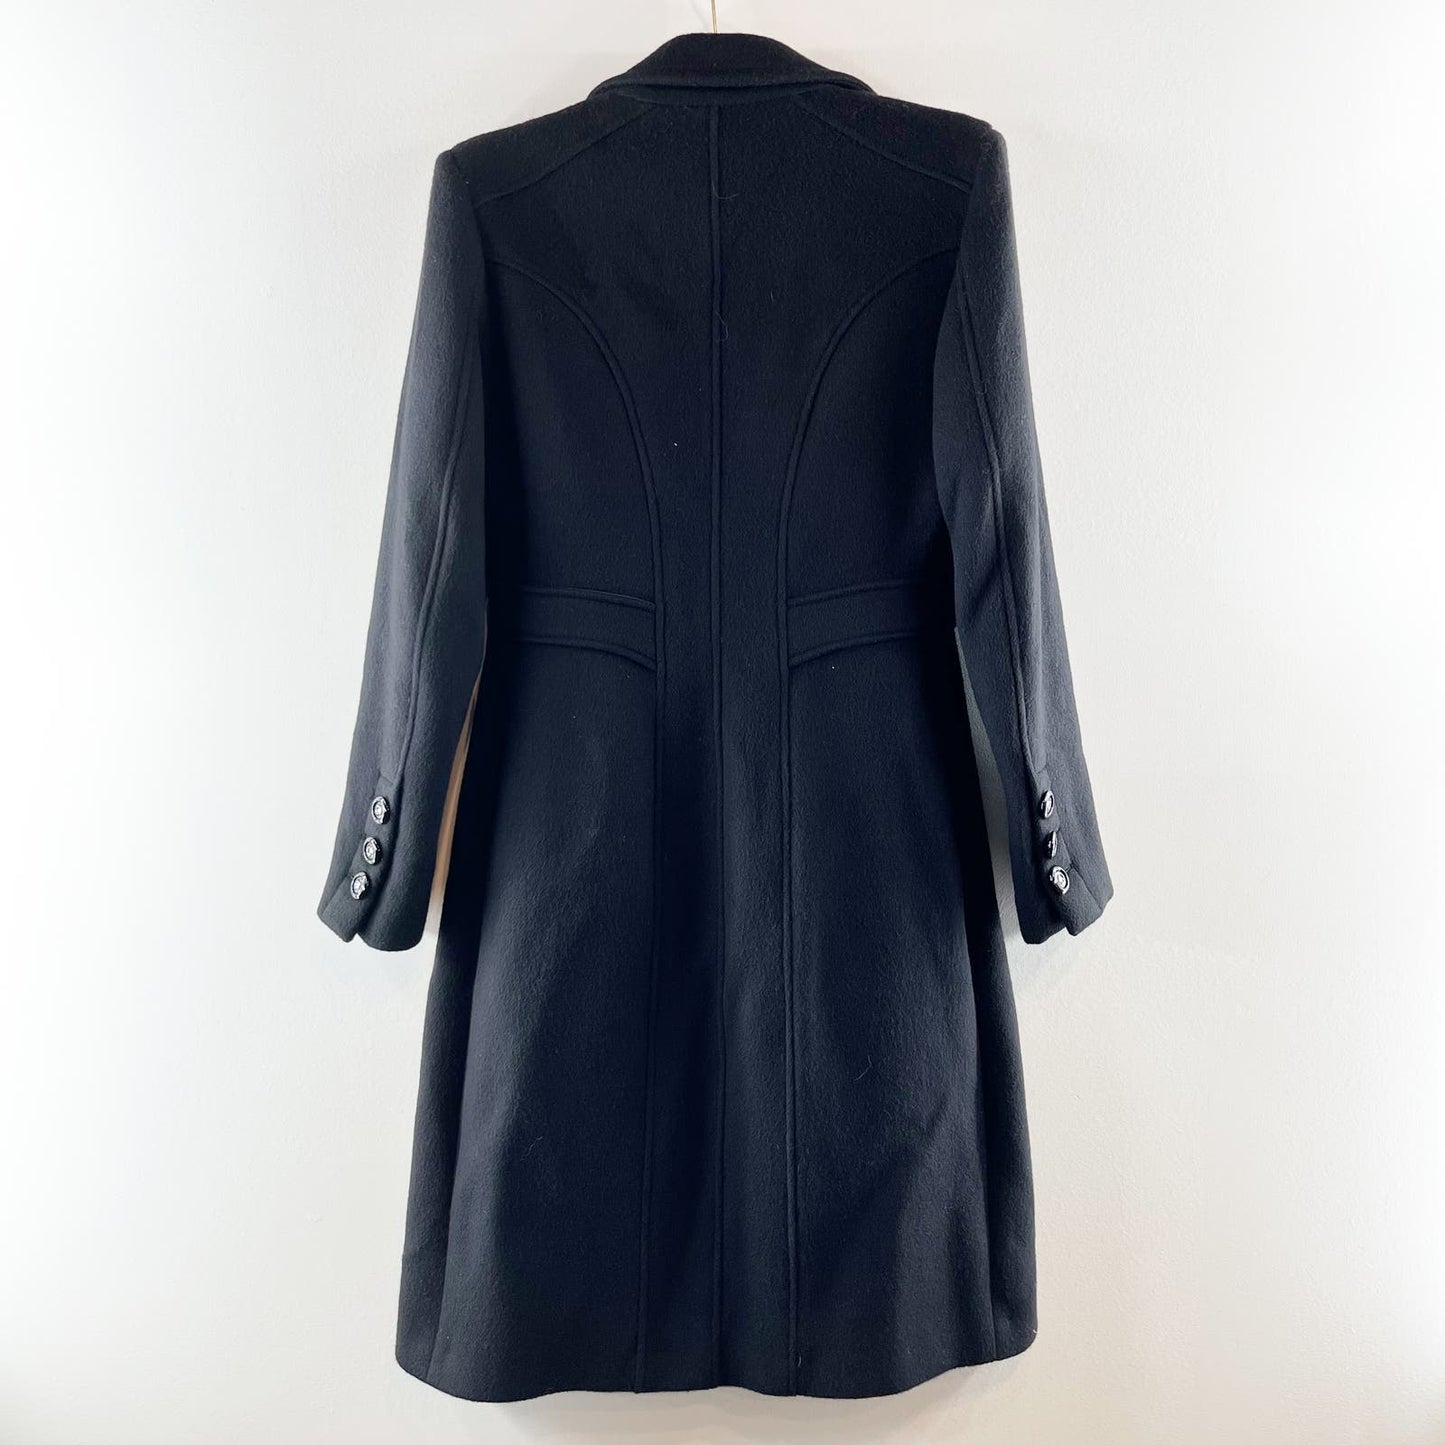 Gianni Versace Wool Cashmere Long Belted Peacoat Jacket Black 12